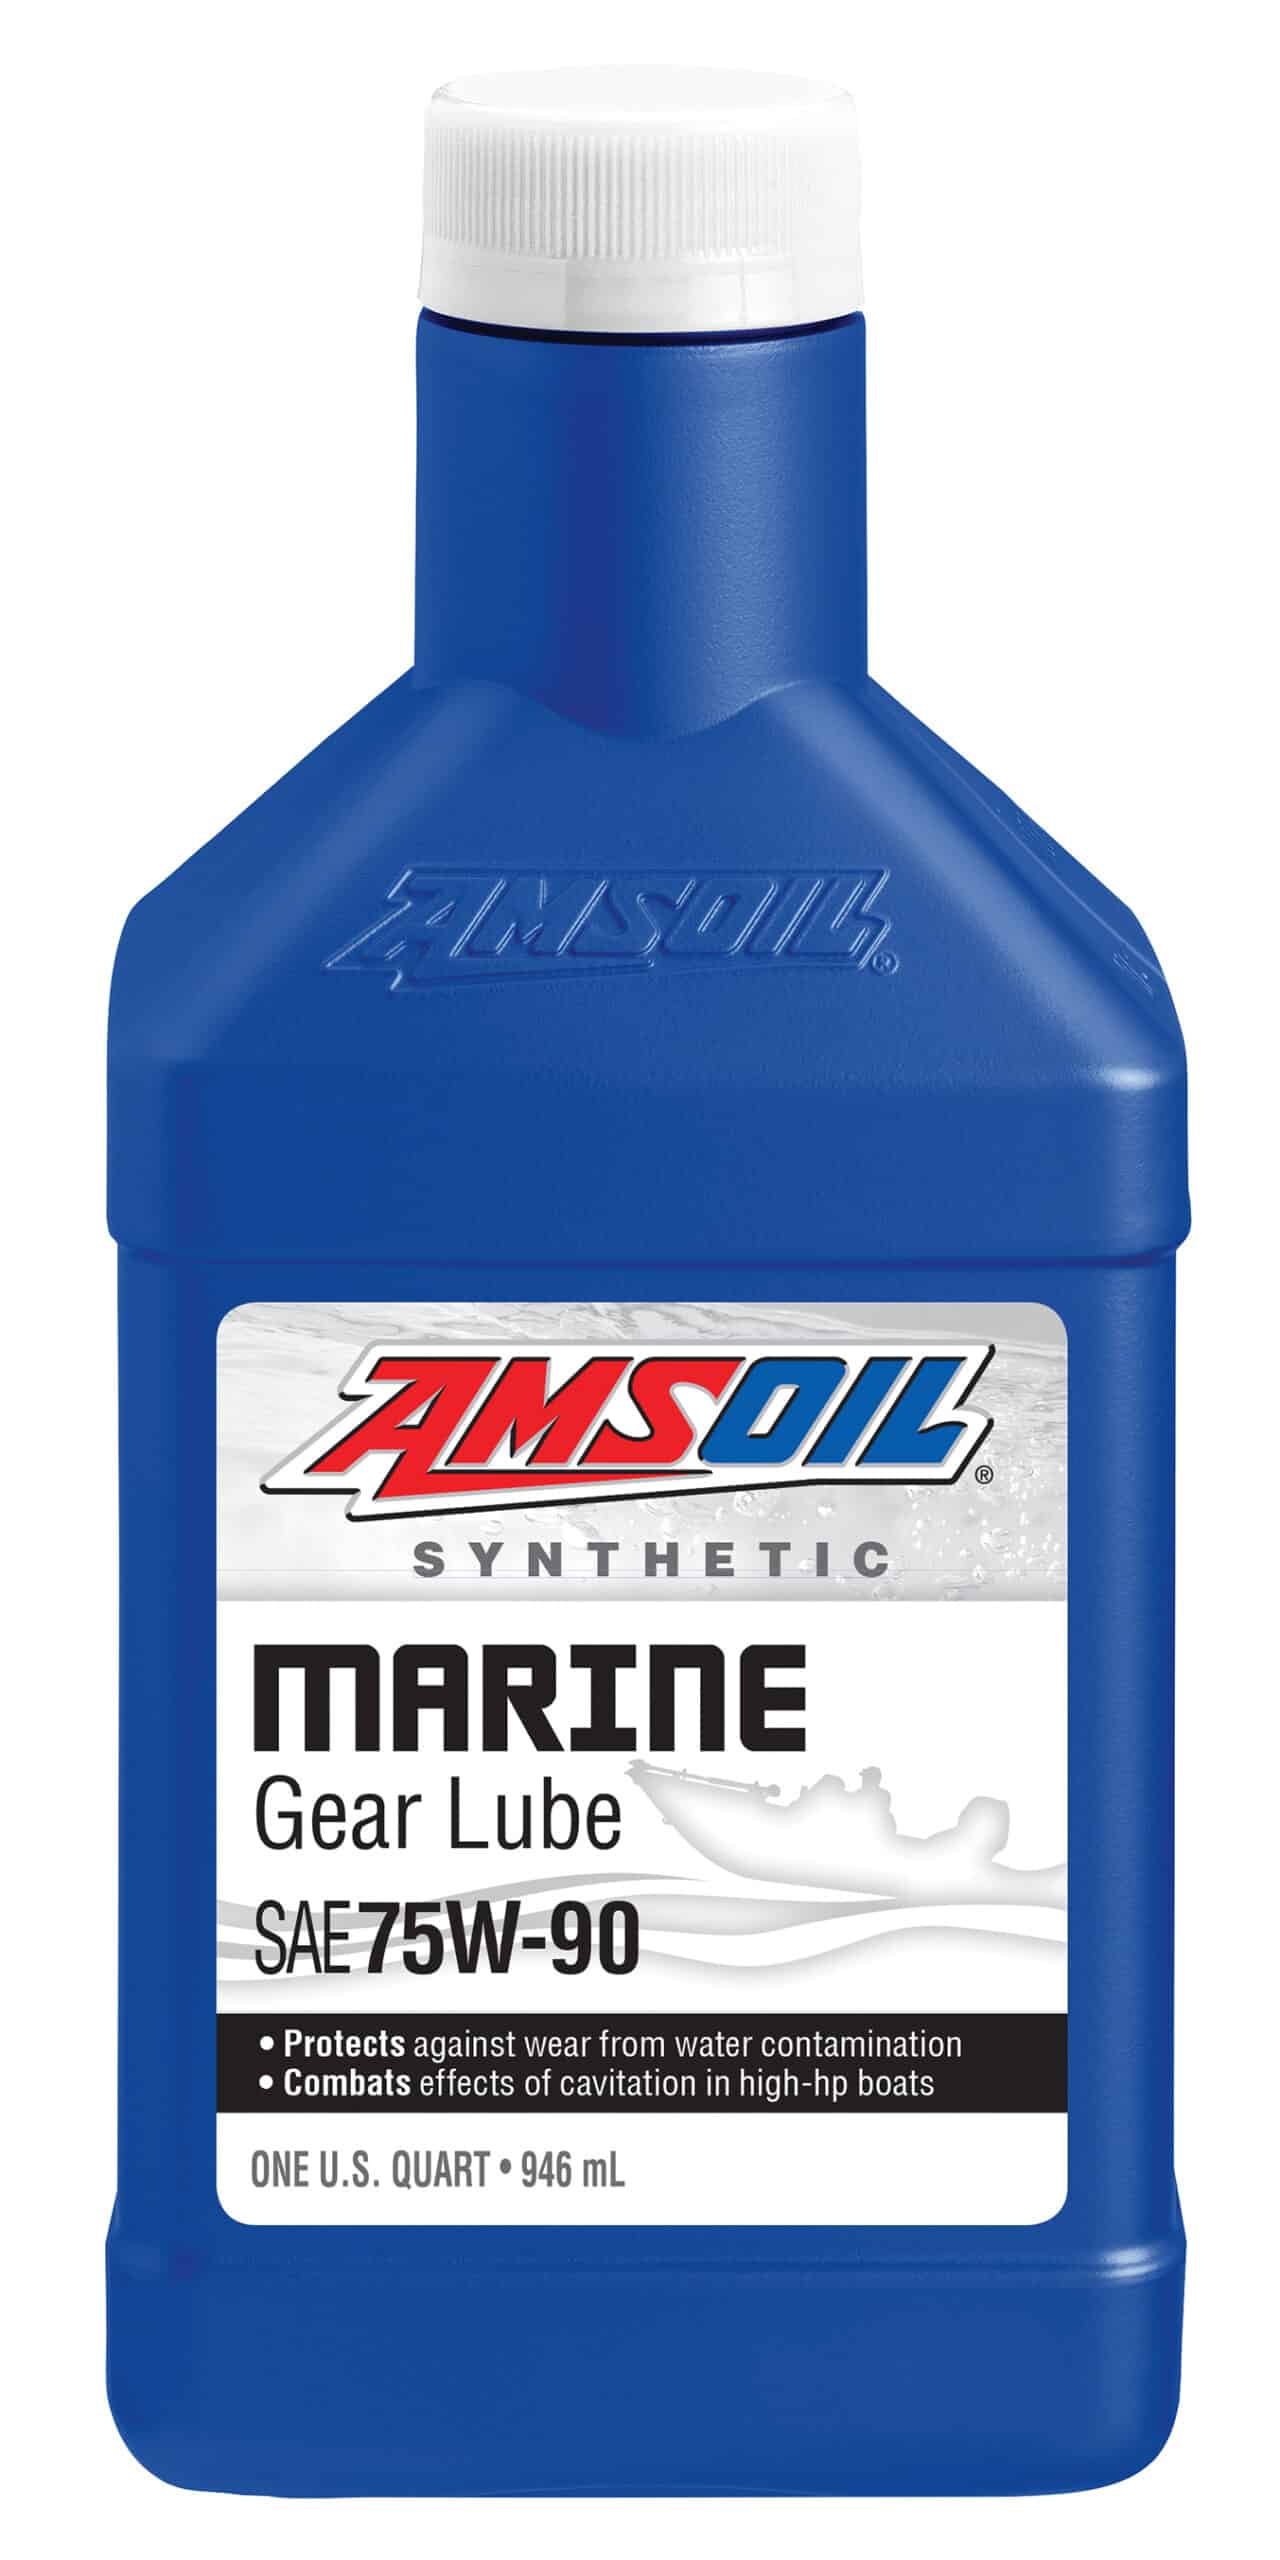 A bottle of AMSOIL Synthetic Marine Gear Lube - an exclusive formulation that addresses the specific concerns of marine applications.